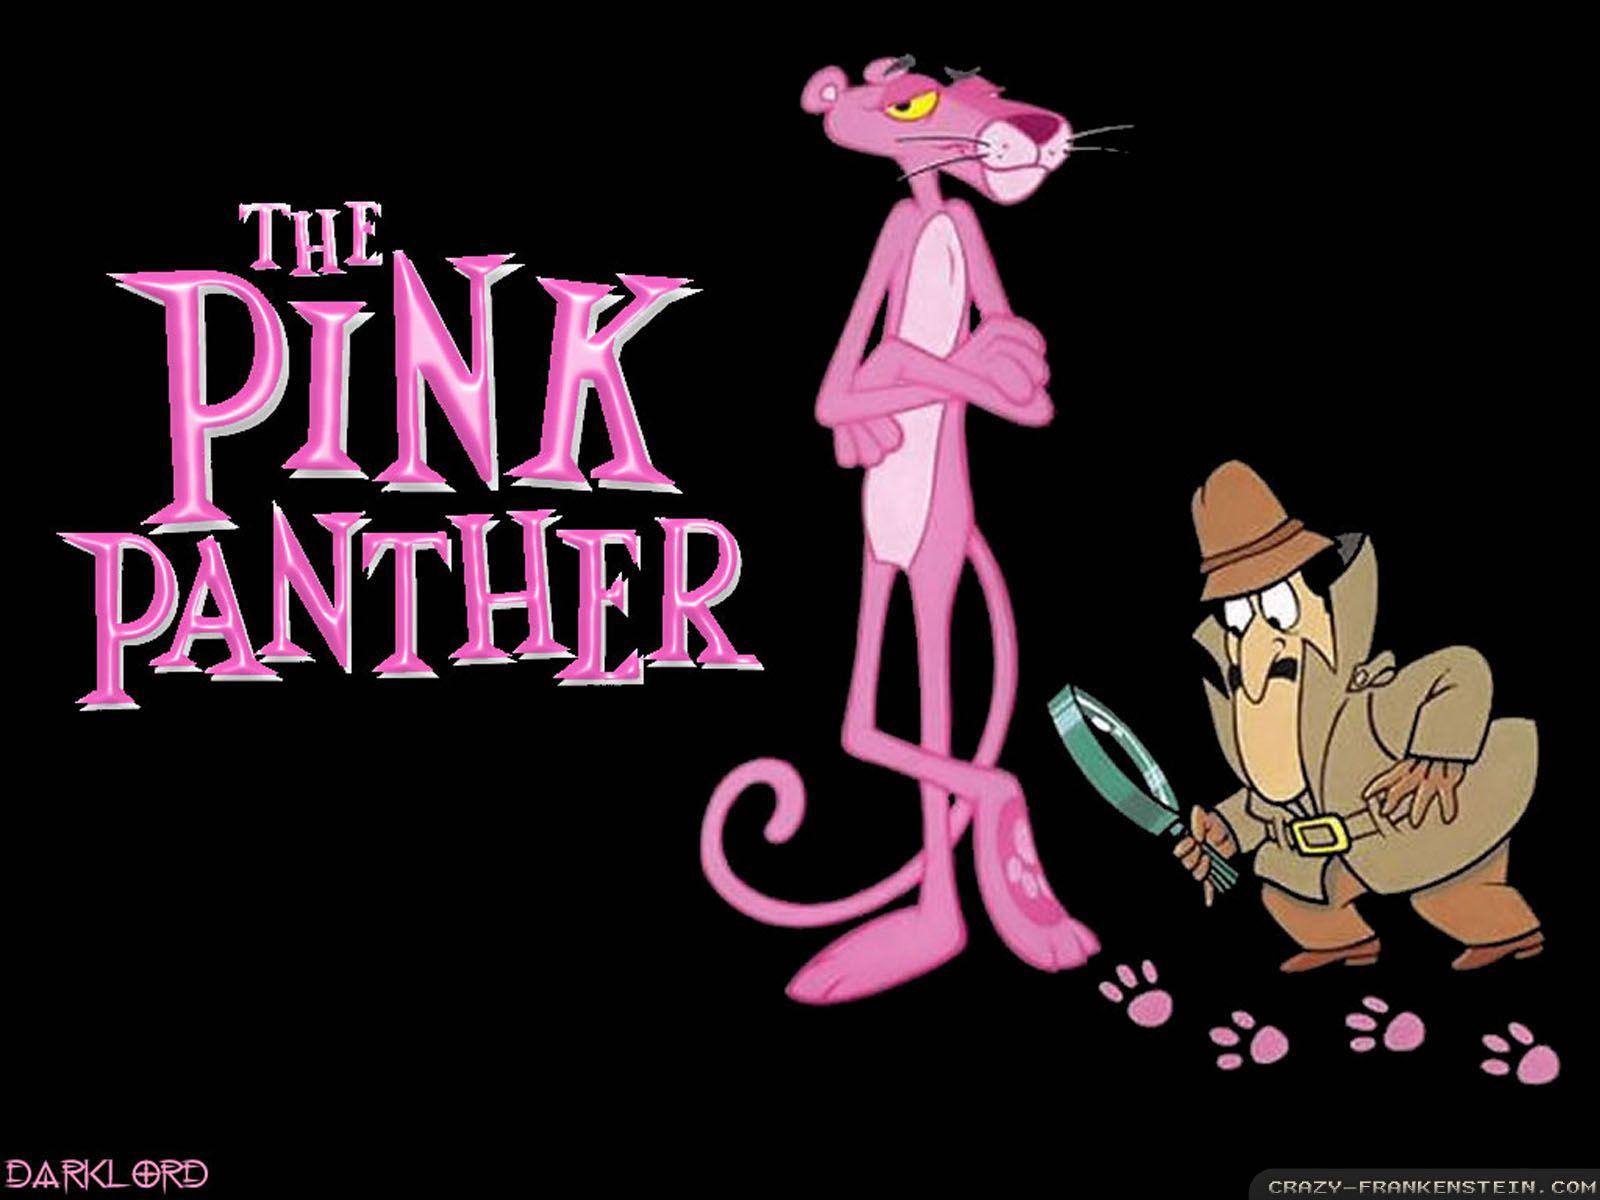 The Pink Panther is a fictional character created in 1963 by the French cartoonist and animator Blake e Huyck. - Pink Panther